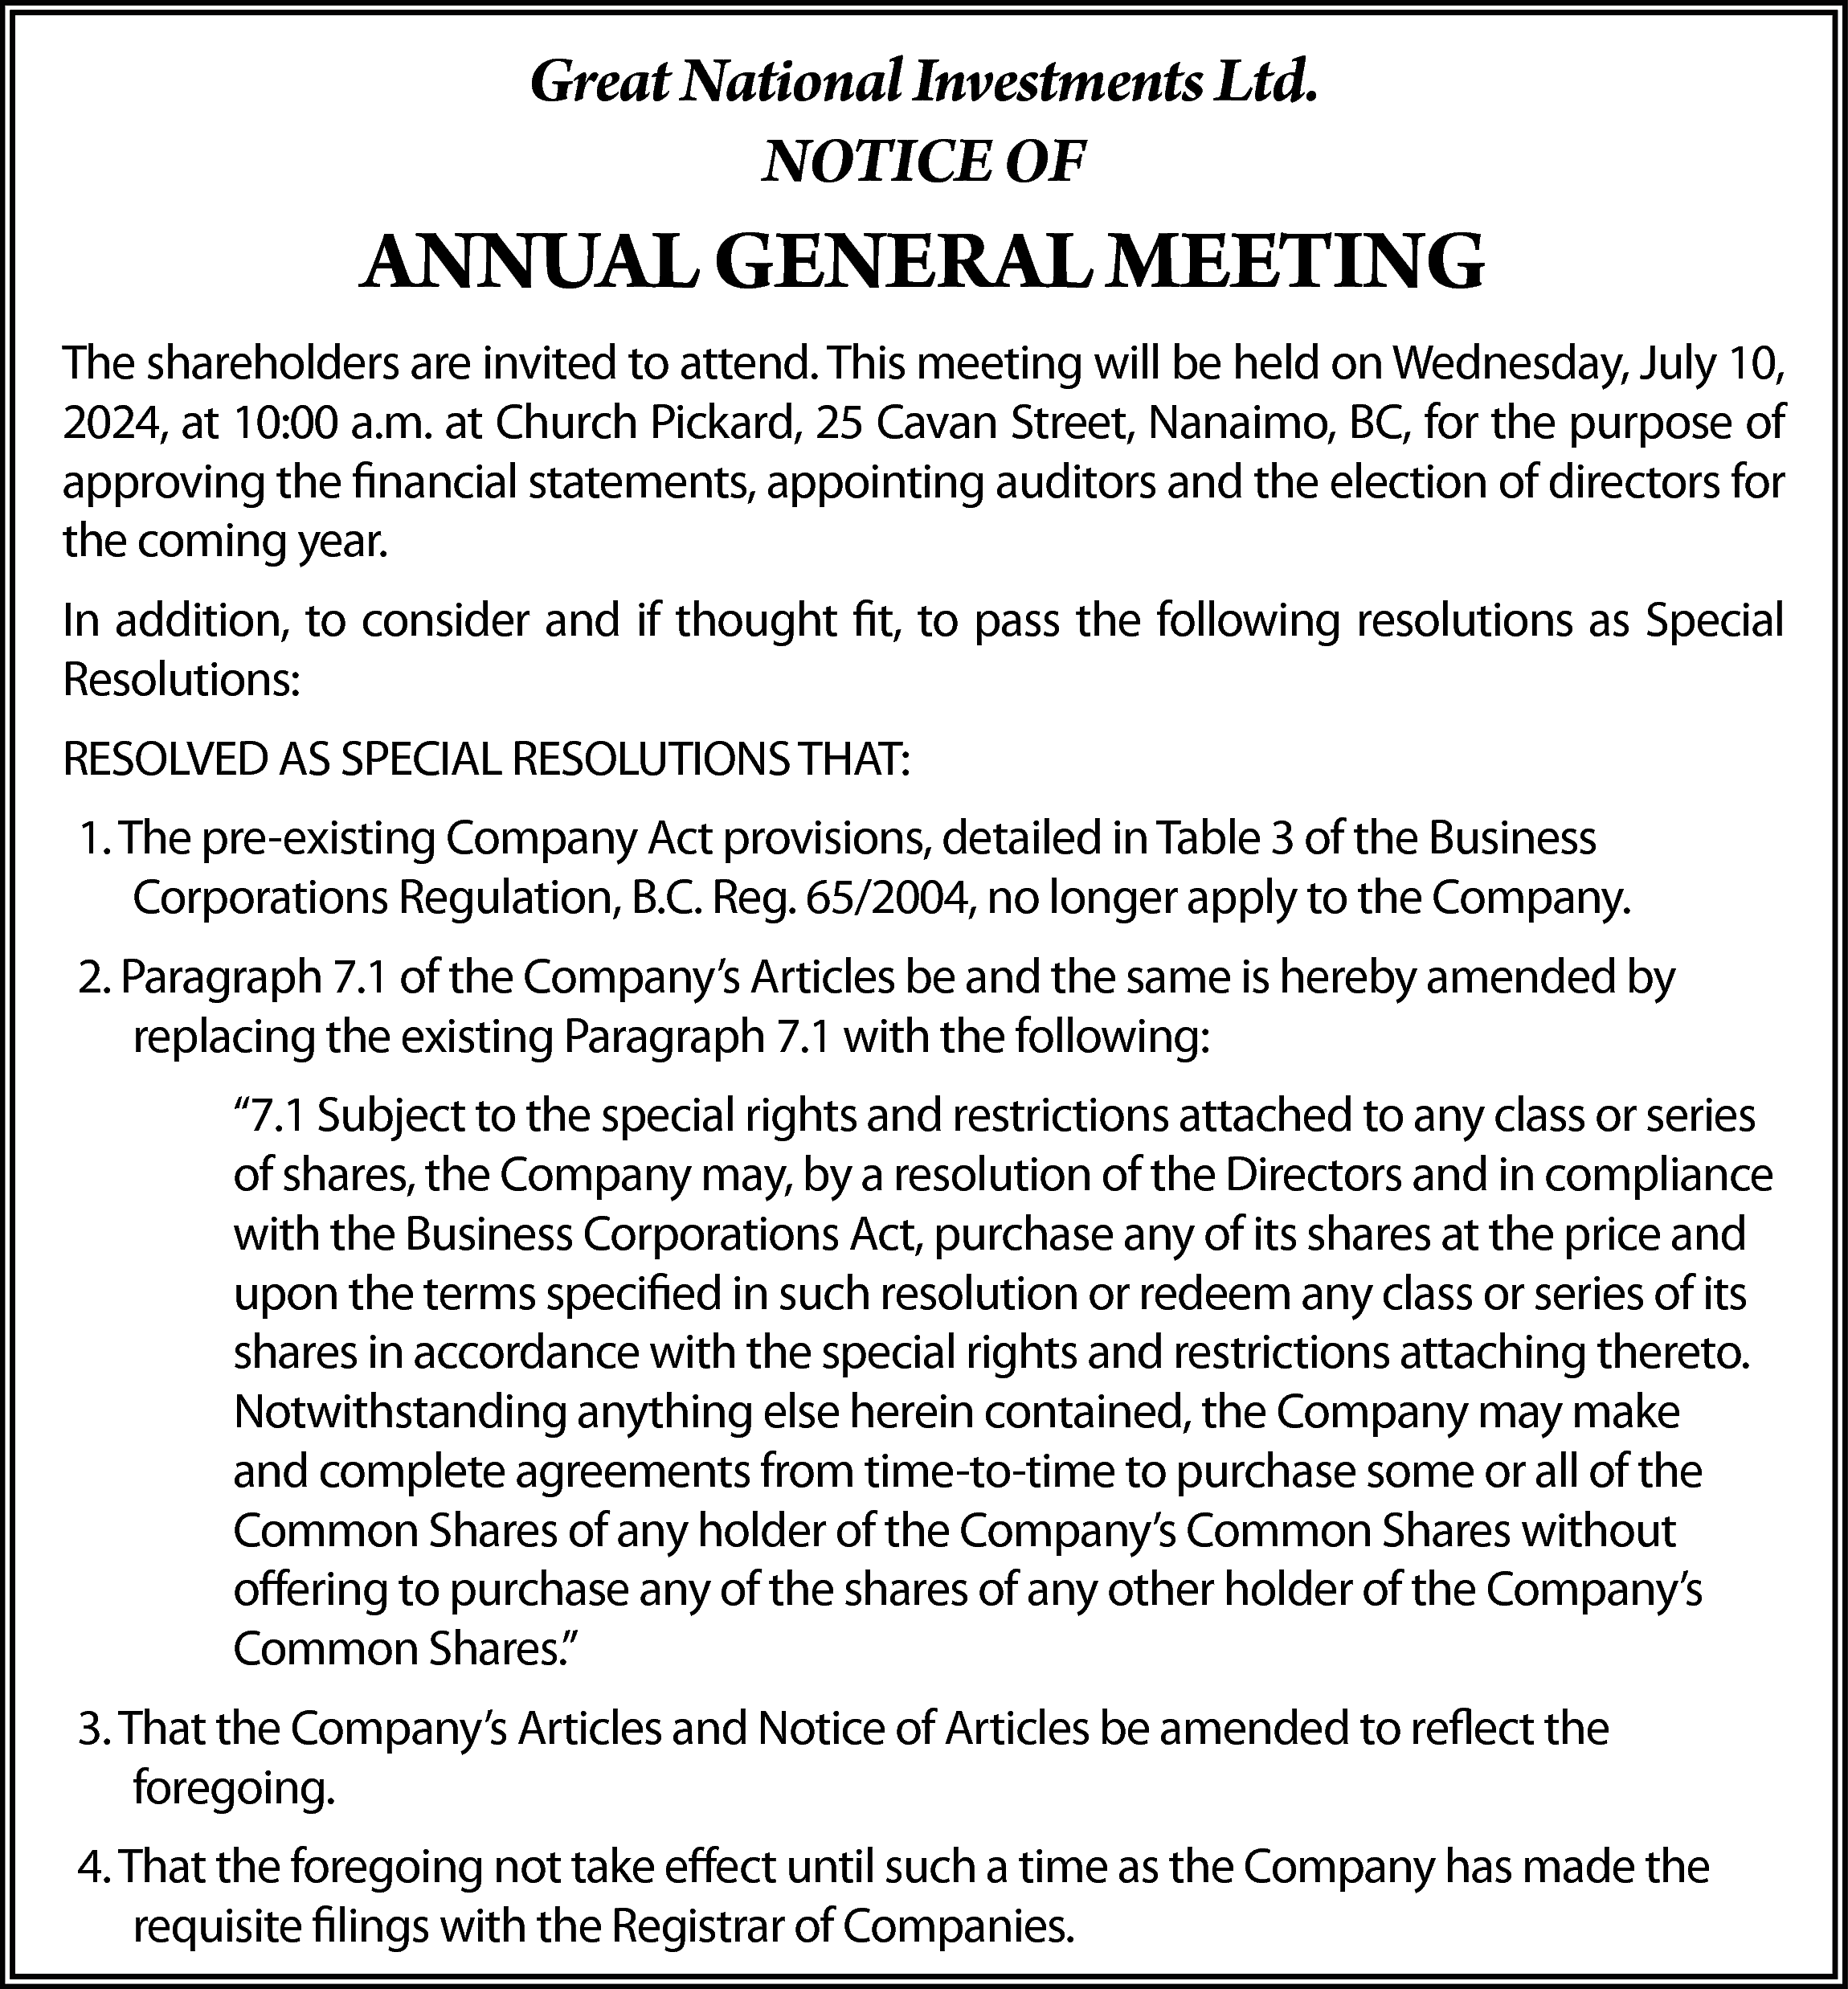 Great National Investments Ltd. <br>NOTICE  Great National Investments Ltd.  NOTICE OF    ANNUAL GENERAL MEETING  The shareholders are invited to attend. This meeting will be held on Wednesday, July 10,  2024, at 10:00 a.m. at Church Pickard, 25 Cavan Street, Nanaimo, BC, for the purpose of  approving the financial statements, appointing auditors and the election of directors for  the coming year.  In addition, to consider and if thought fit, to pass the following resolutions as Special  Resolutions:  RESOLVED AS SPECIAL RESOLUTIONS THAT:  1. The pre-existing Company Act provisions, detailed in Table 3 of the Business  Corporations Regulation, B.C. Reg. 65/2004, no longer apply to the Company.  2. Paragraph 7.1 of the Company’s Articles be and the same is hereby amended by  replacing the existing Paragraph 7.1 with the following:  “7.1 Subject to the special rights and restrictions attached to any class or series  of shares, the Company may, by a resolution of the Directors and in compliance  with the Business Corporations Act, purchase any of its shares at the price and  upon the terms specified in such resolution or redeem any class or series of its  shares in accordance with the special rights and restrictions attaching thereto.  Notwithstanding anything else herein contained, the Company may make  and complete agreements from time-to-time to purchase some or all of the  Common Shares of any holder of the Company’s Common Shares without  offering to purchase any of the shares of any other holder of the Company’s  Common Shares.”  3. That the Company’s Articles and Notice of Articles be amended to reflect the  foregoing.  4. That the foregoing not take effect until such a time as the Company has made the  requisite filings with the Registrar of Companies.    